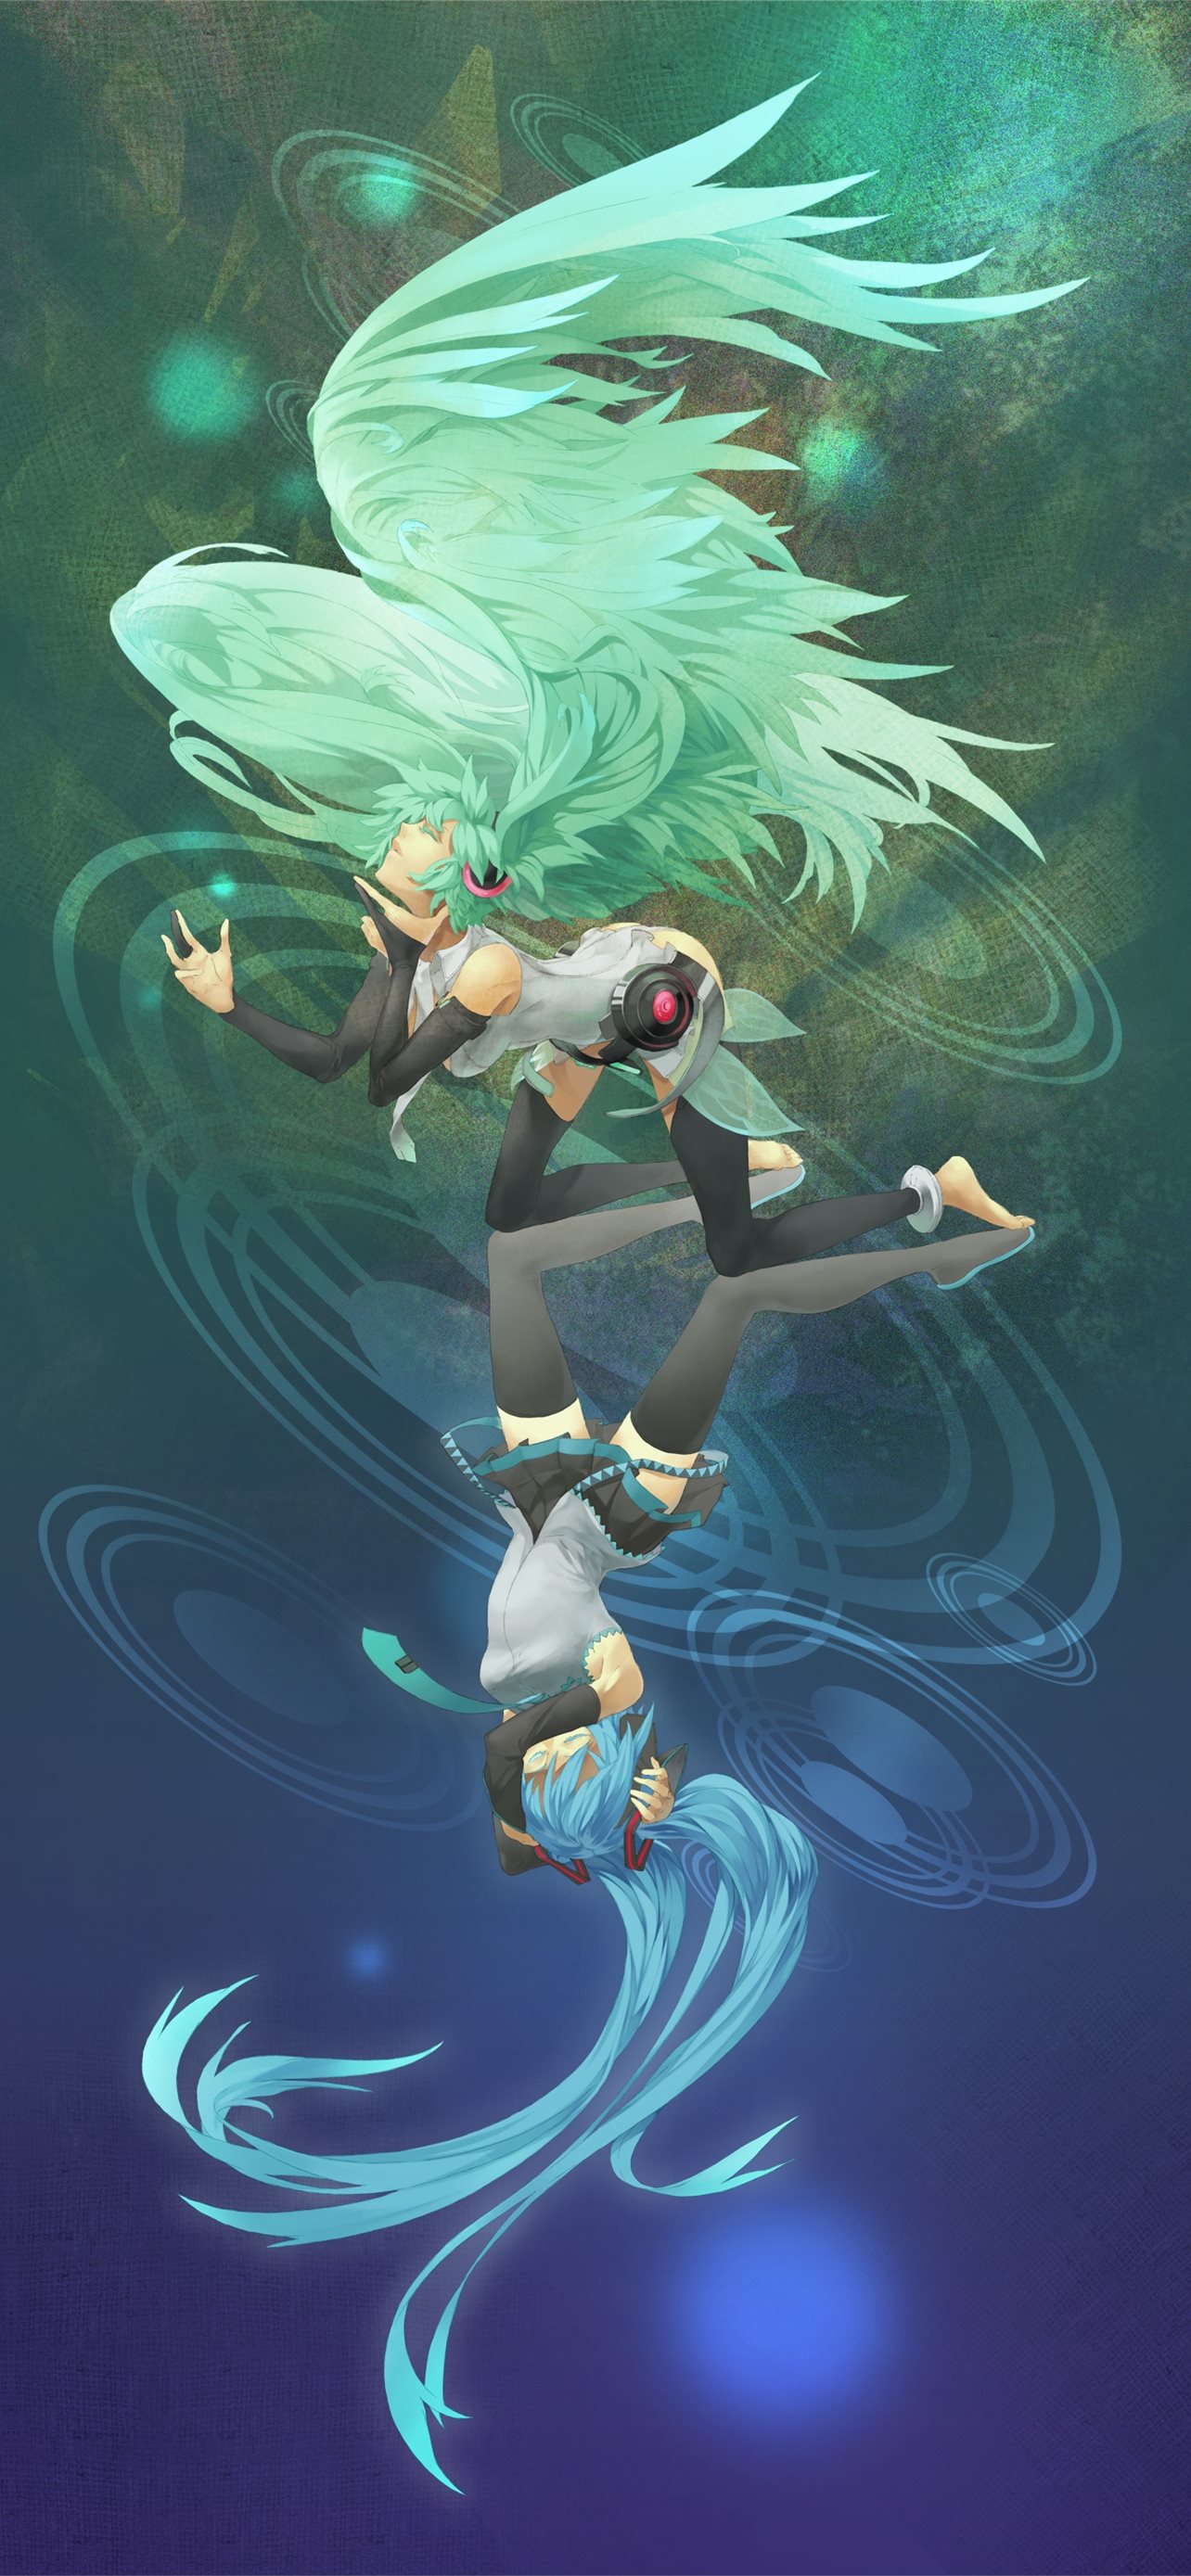 Vocaloid Hatsune Miku Vertical Miku Append Anime Iphone Wallpapers Free Download